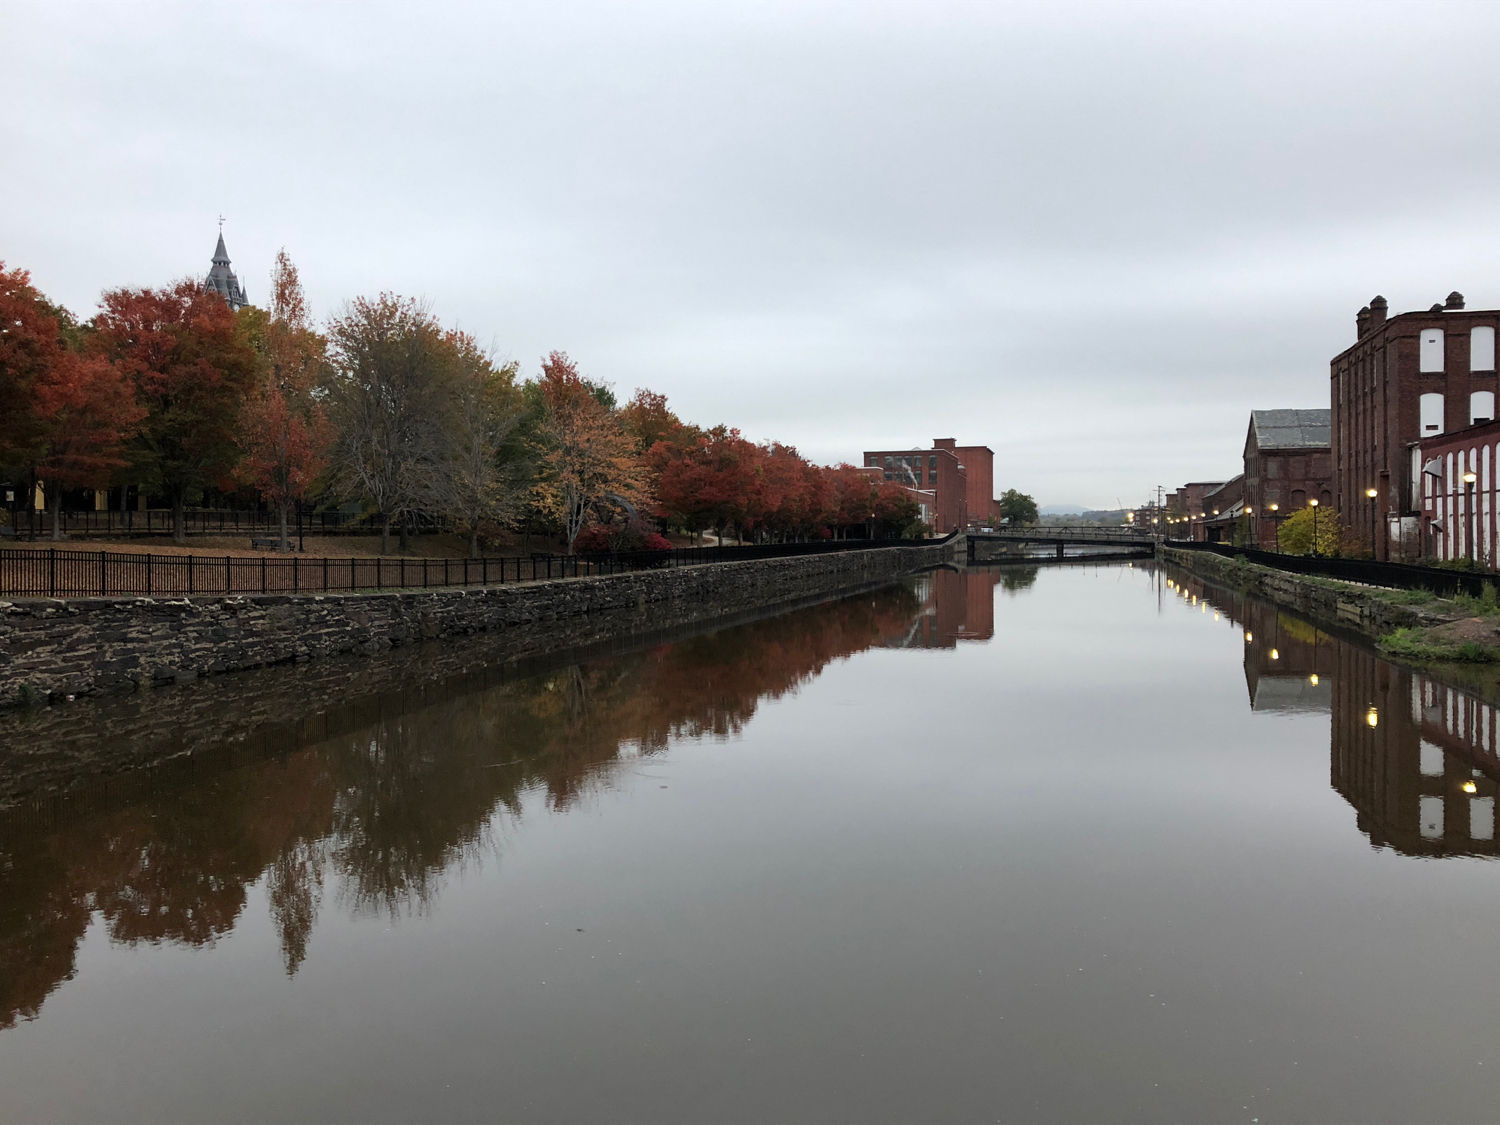 View of a Holyoke canal — copyright Trace Meek